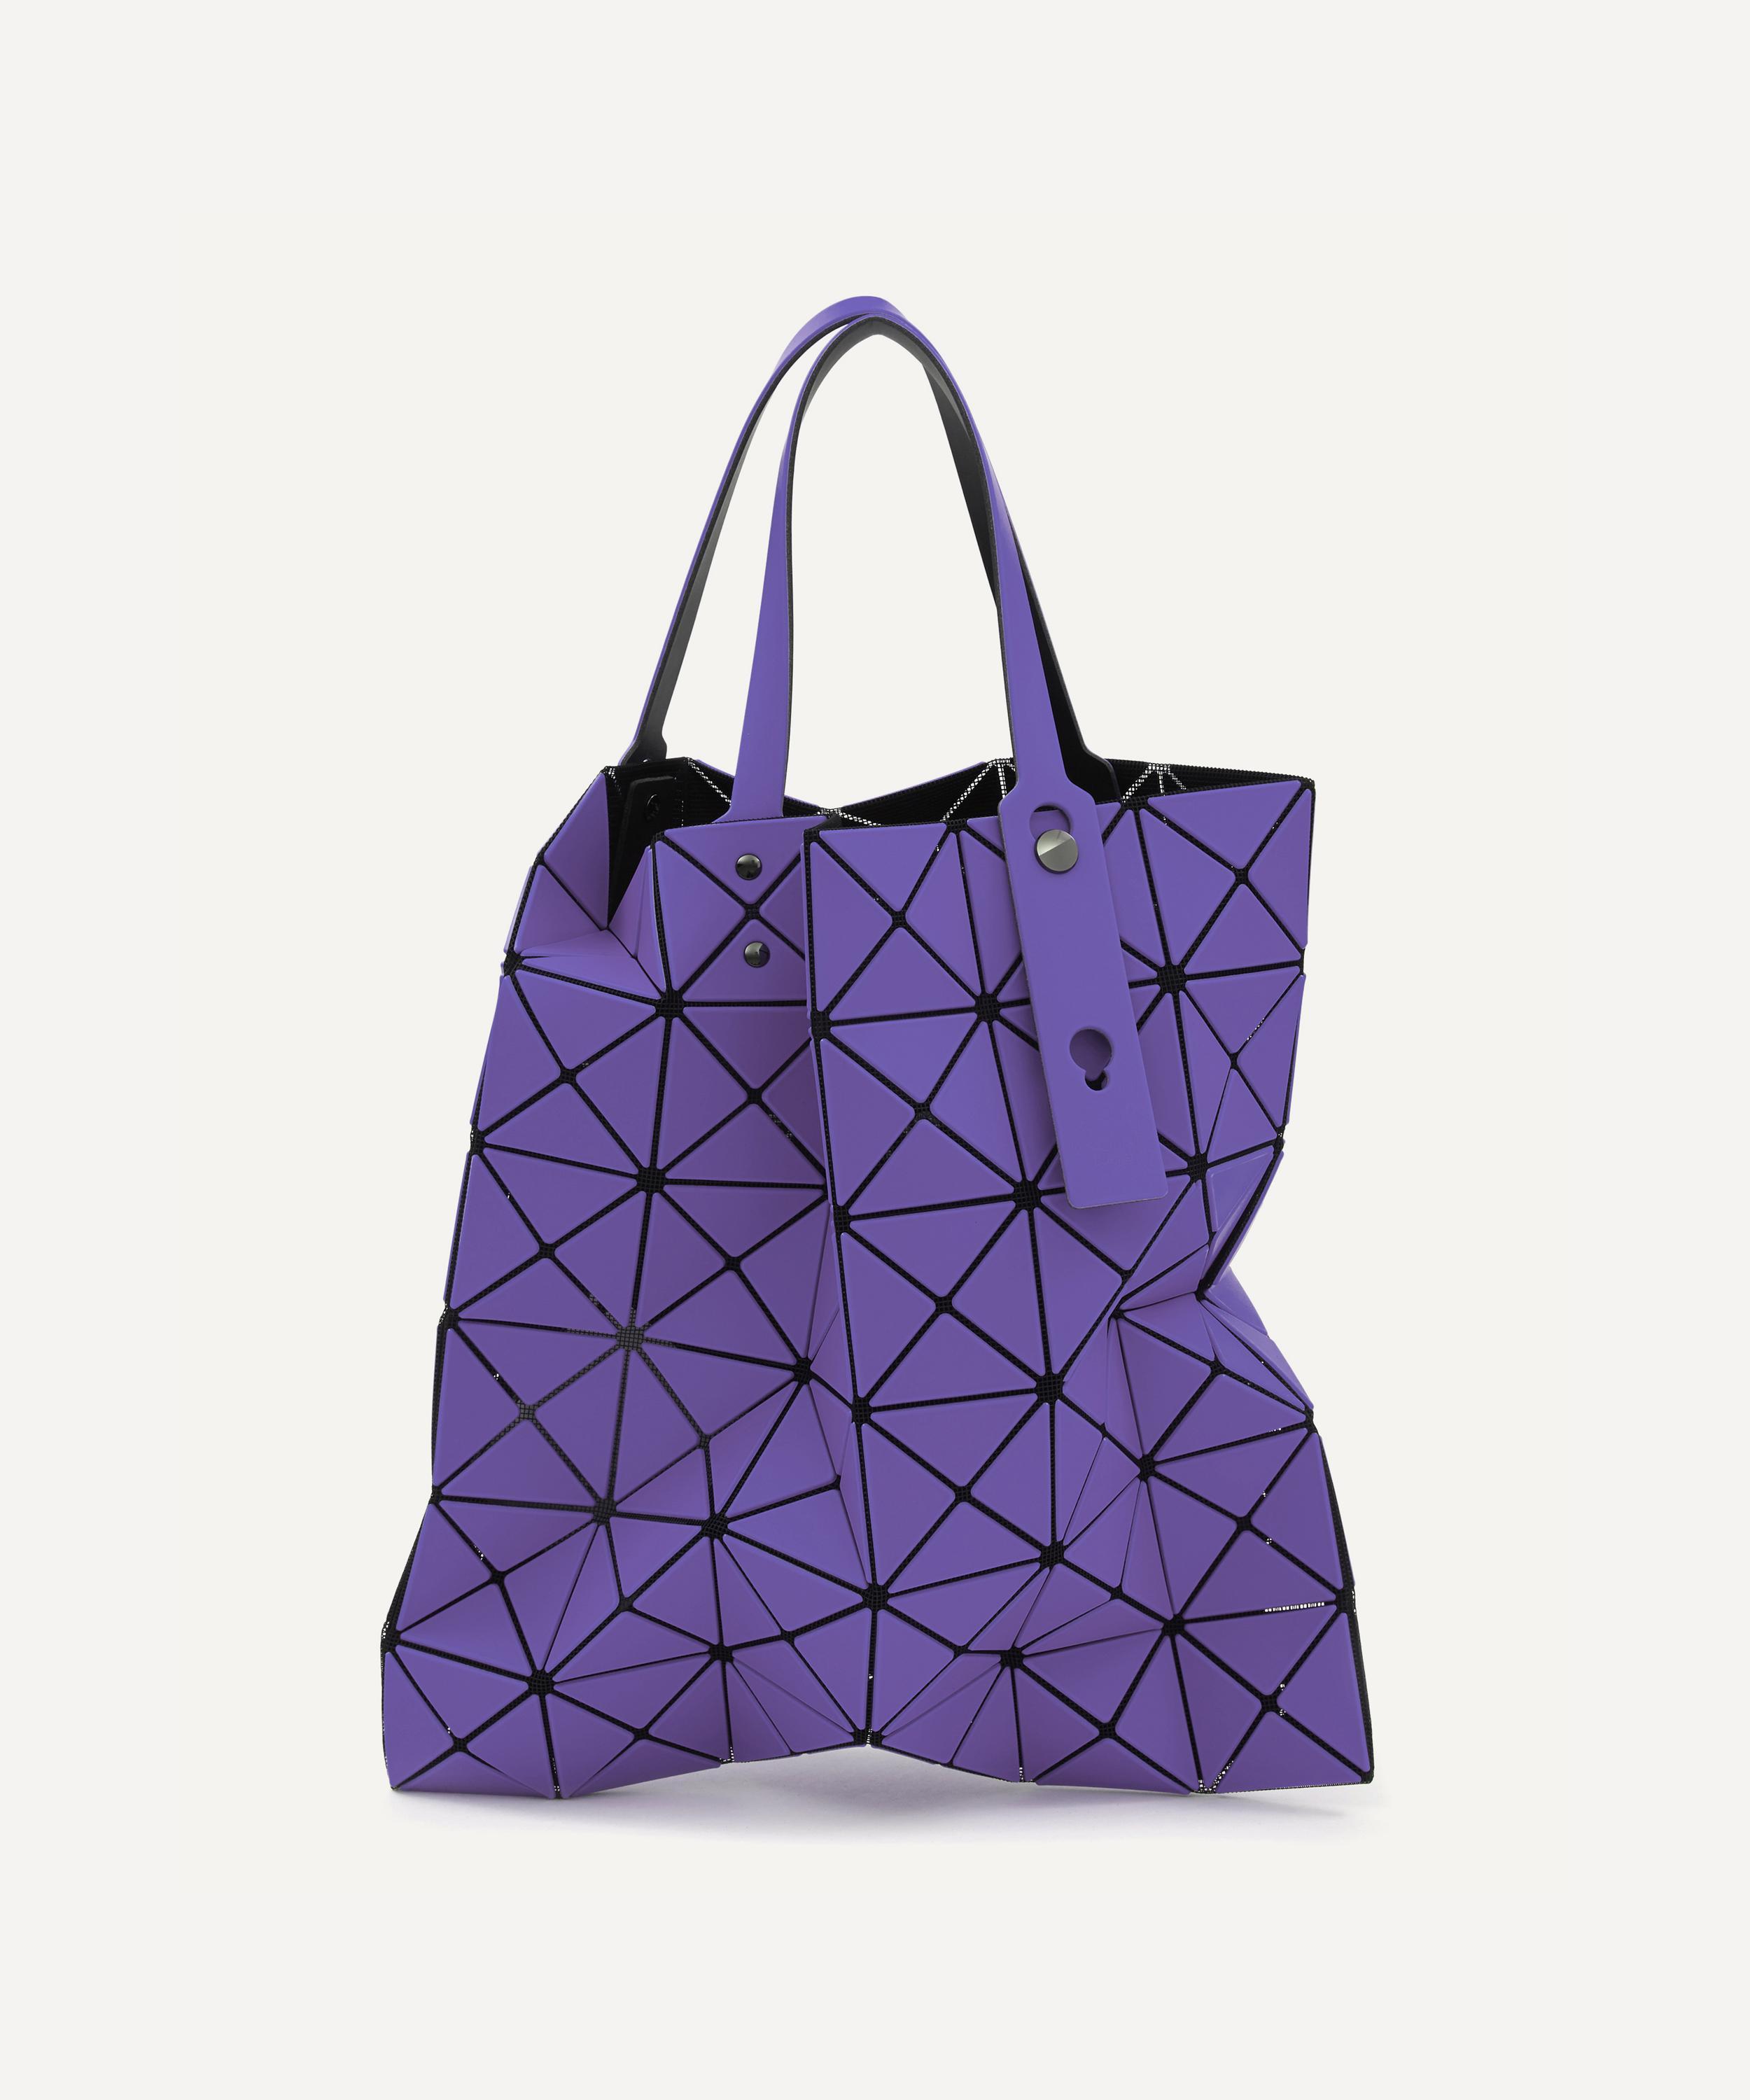 Bao Bao Issey Miyake Lucent Frost Tote Bag in Purple - Lyst